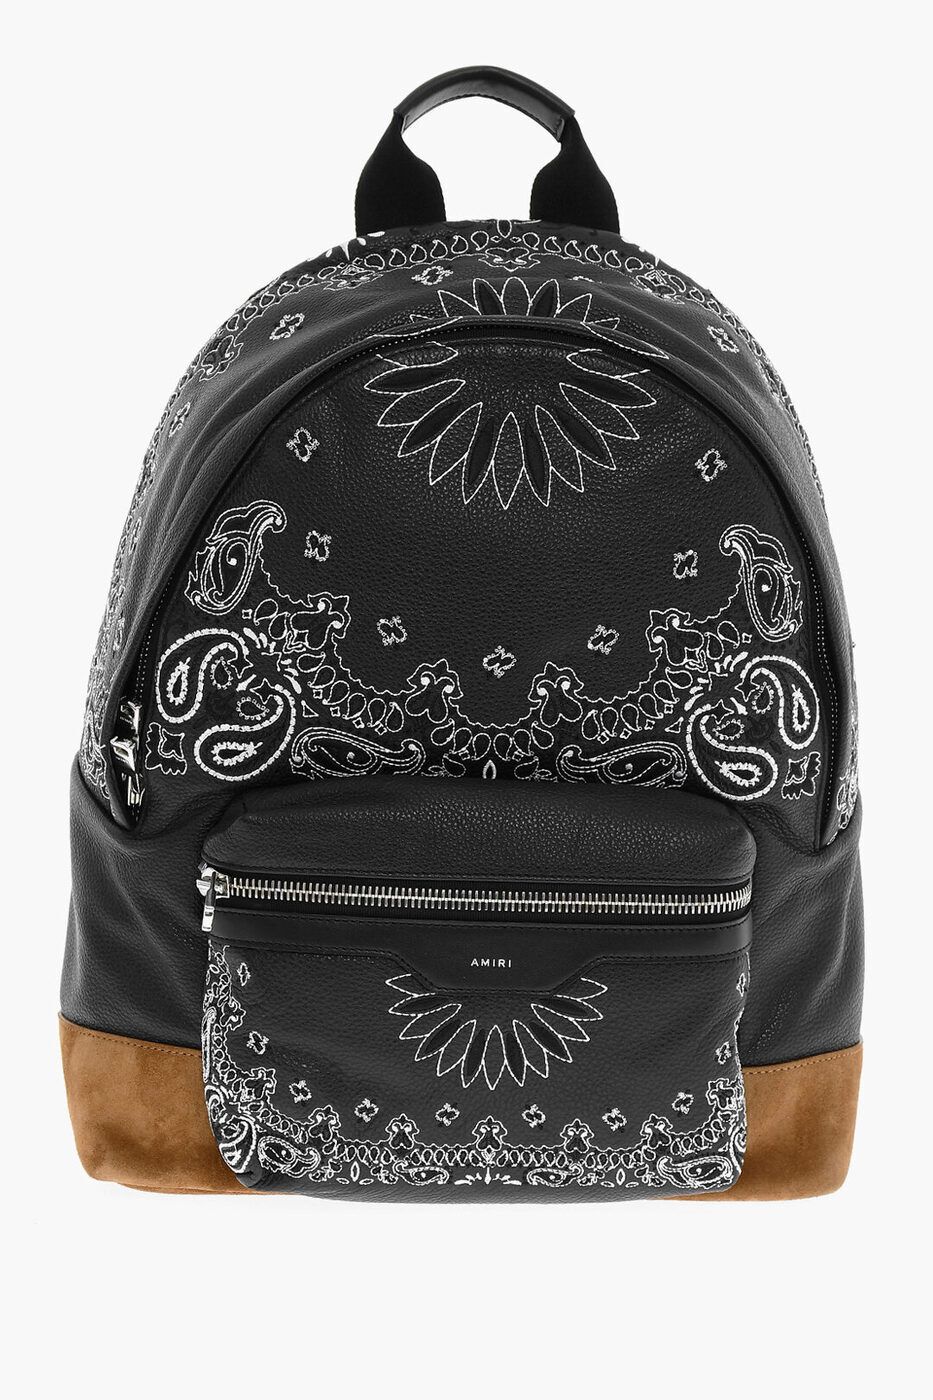 AMIRI アミリ バックパック MAB006 019 メンズ BANDANA MOTIF SUEDE AND TEXTURED LEATHER ACKPACK 【関税・送料無料】【ラッピング無料】 dk